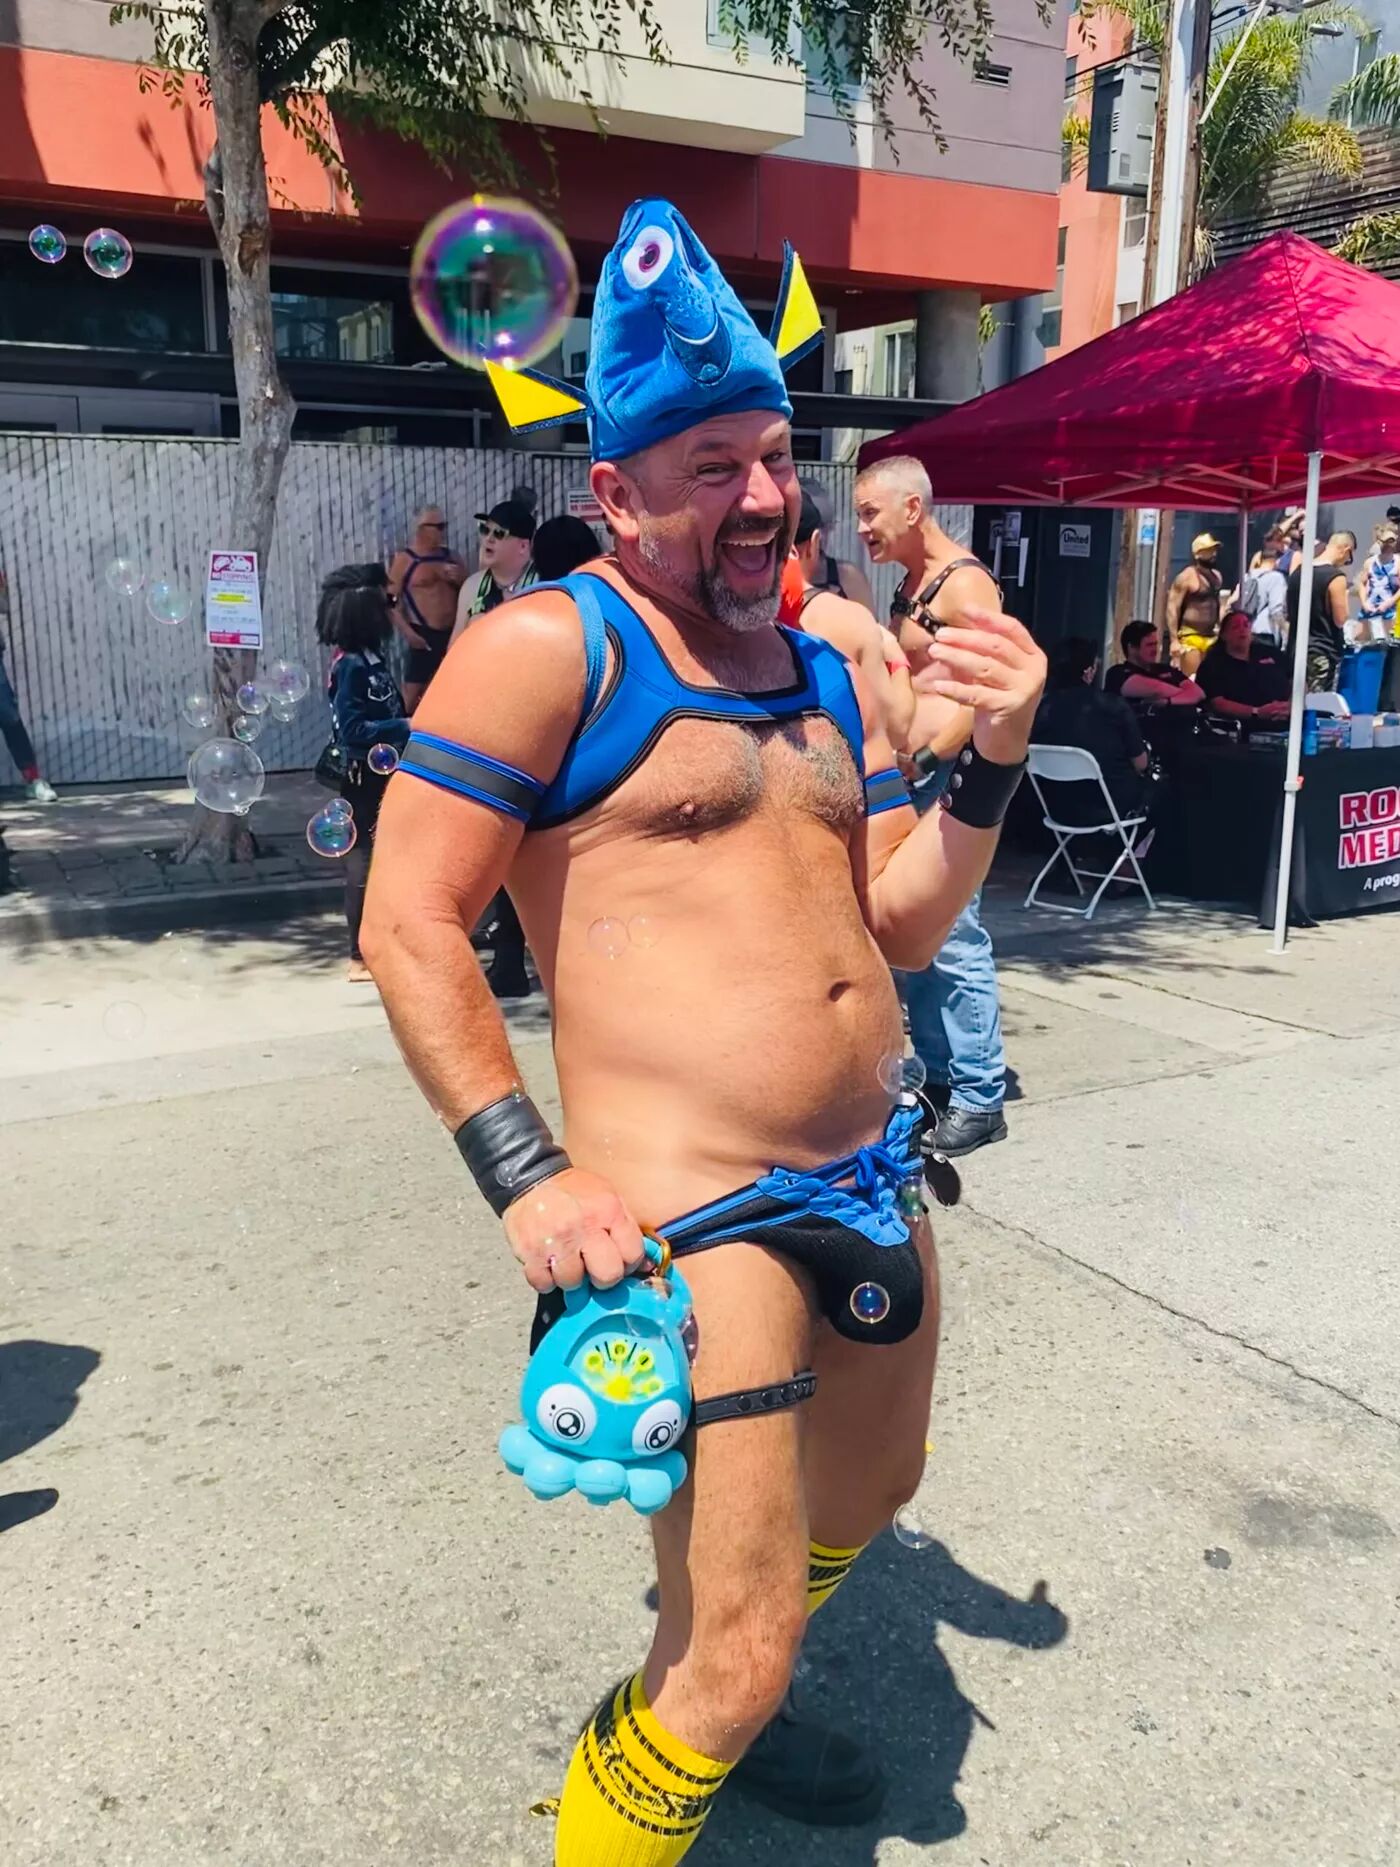 A nearly nude man sporting a Dory hat and blue jockstrap blows bubbles in the street